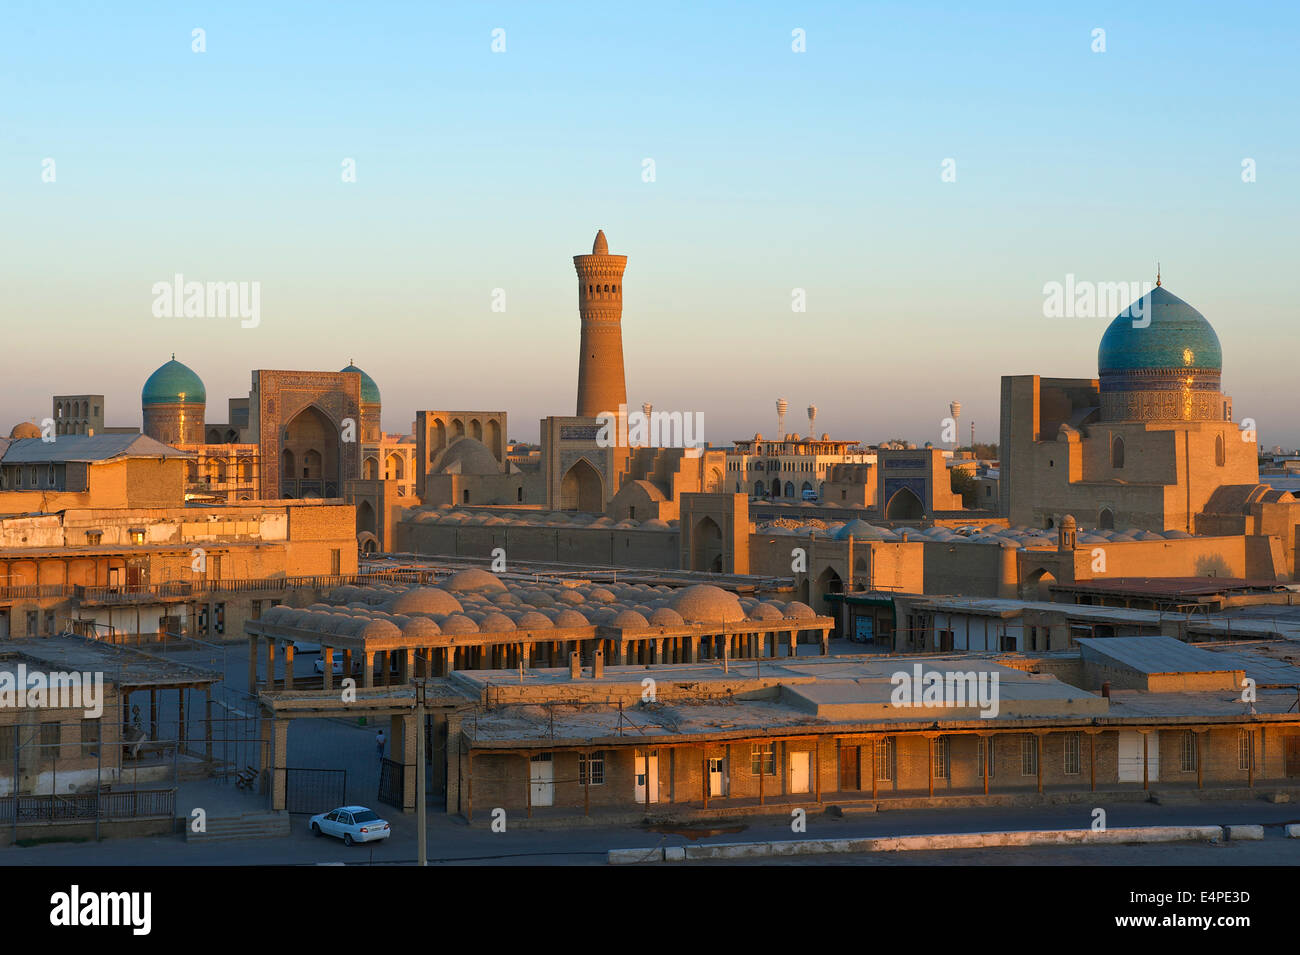 View from the Ark Fortress of the historic centre with the Mir-i-Arab Madrasah and the Kalon Mosque, Bukhara, Uzbekistan Stock Photo